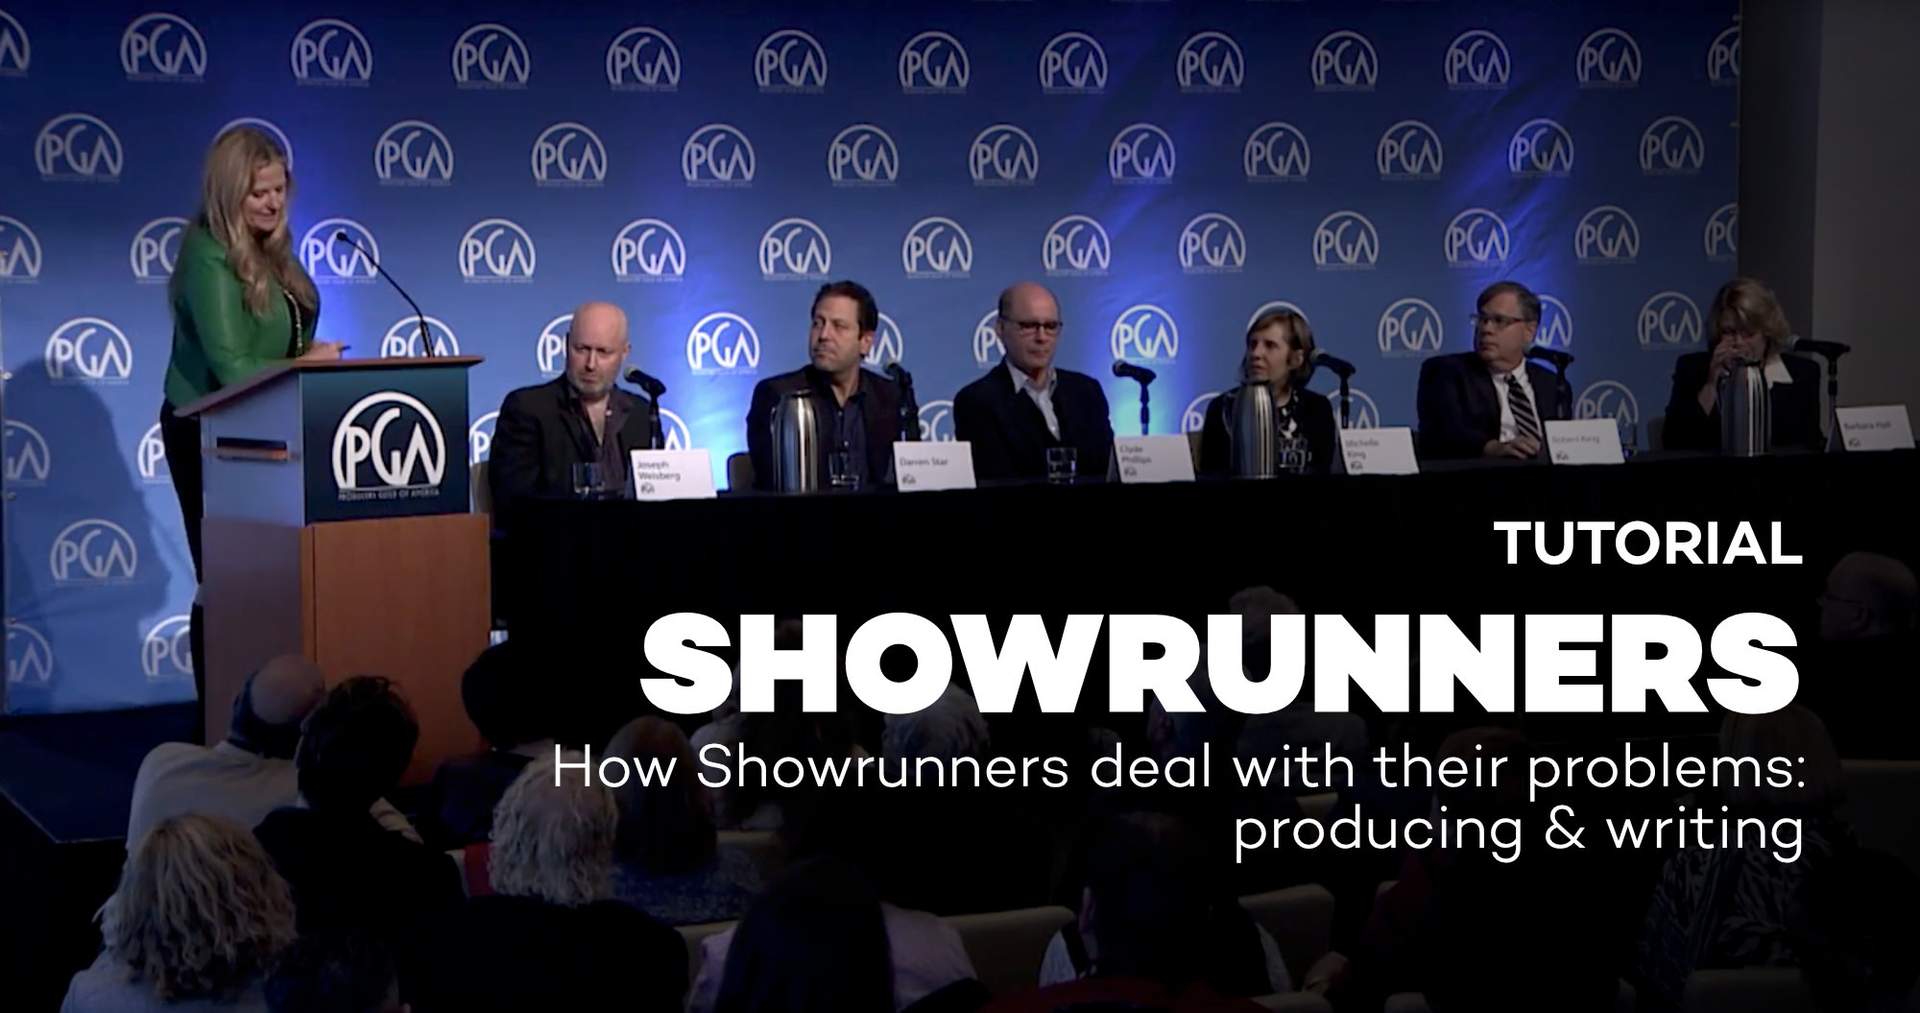 How Showrunners deal with their problems: producing & writing